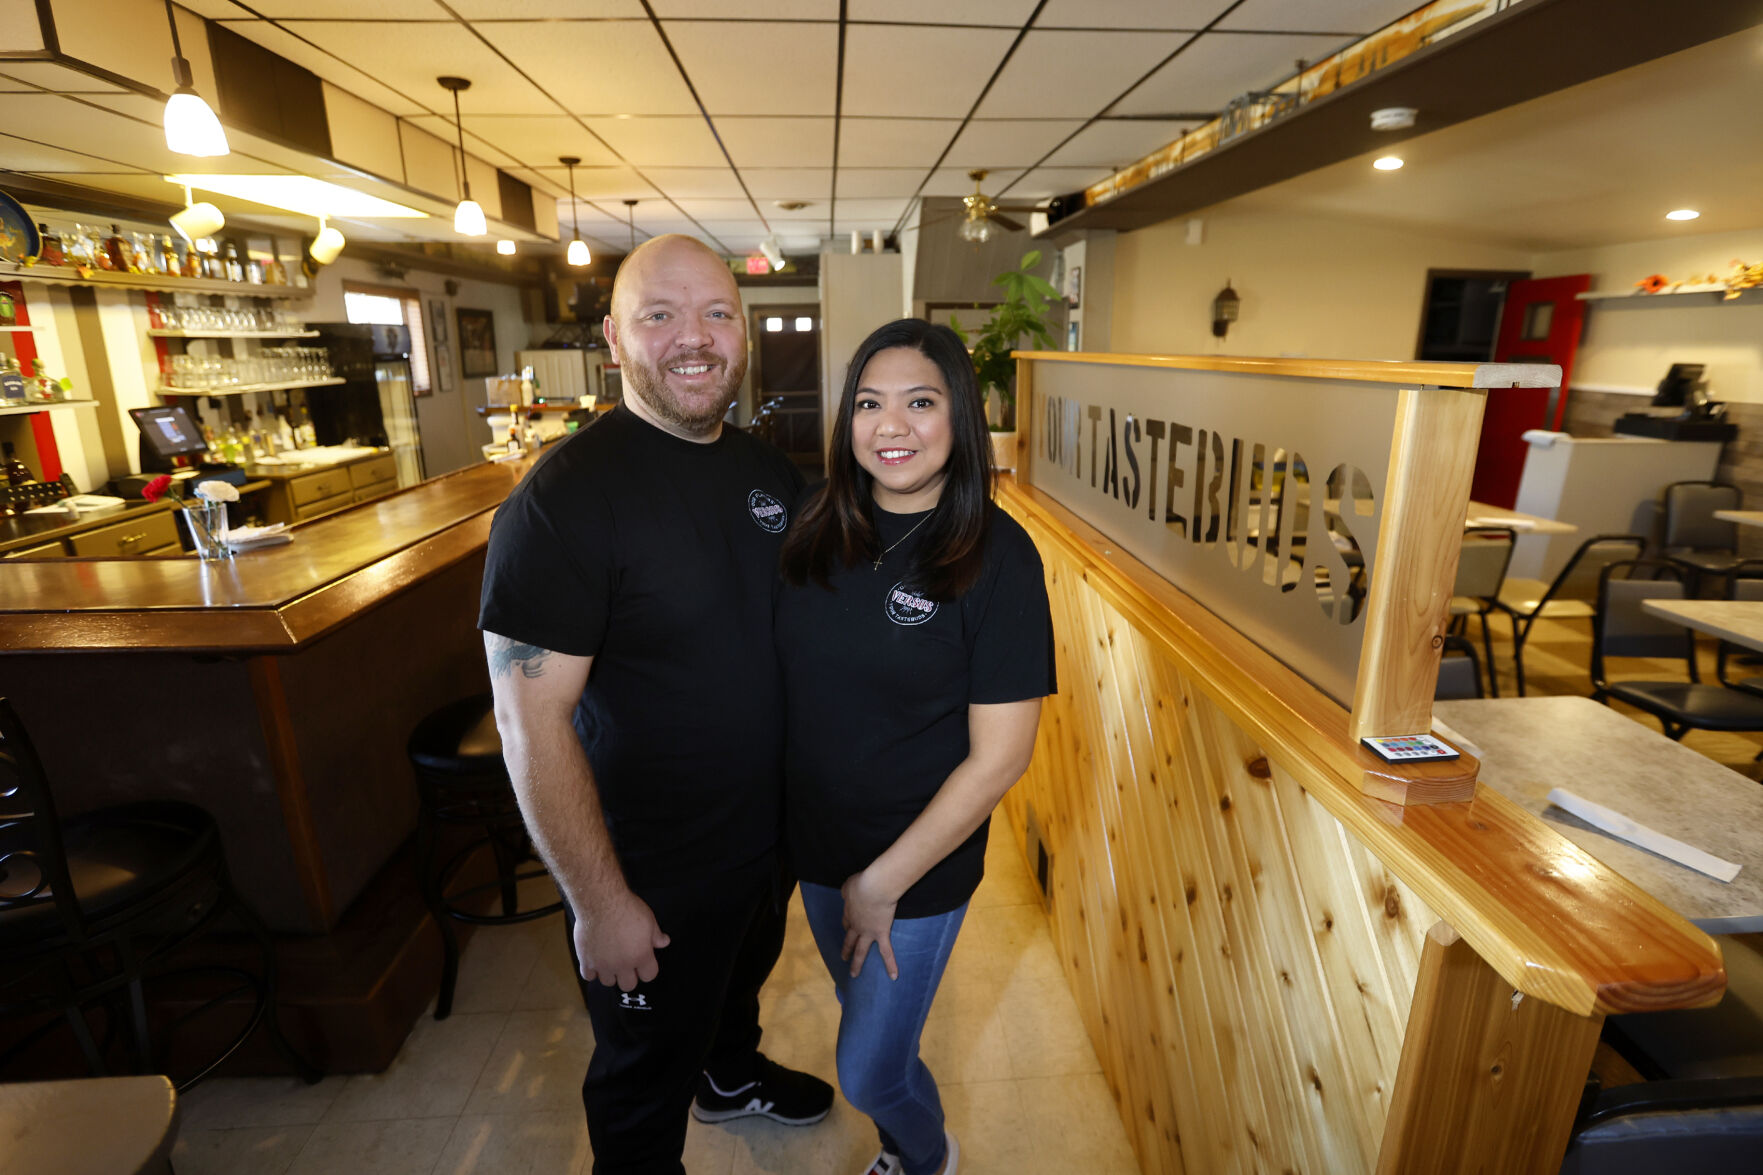 Owners Lucas and Liberty Miller inside Versus 2.0 Authentic Asian Kitchen/Bar, 2364 Washington St.    PHOTO CREDIT: File photo